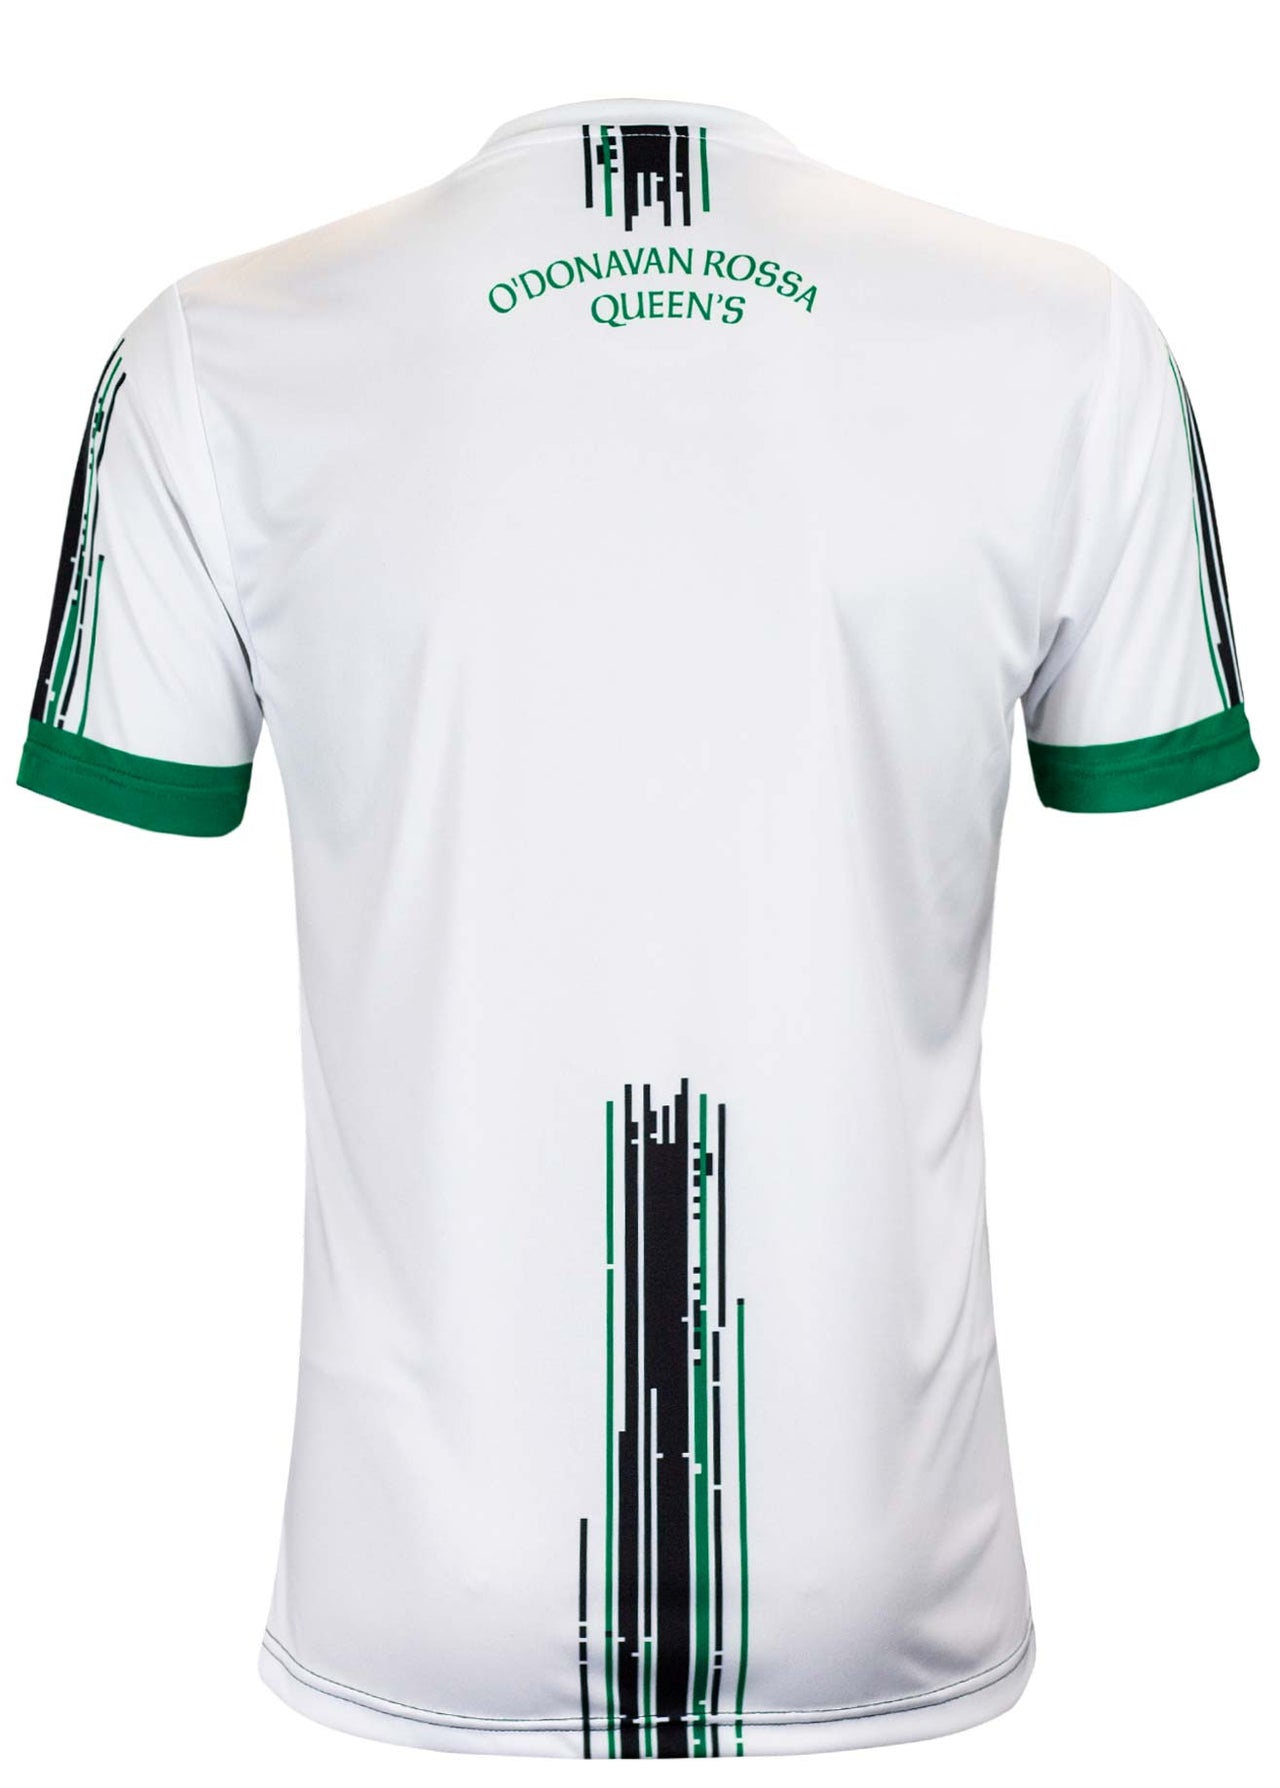 O'Donovan Rossa New York Training Jersey Player Fit Adult